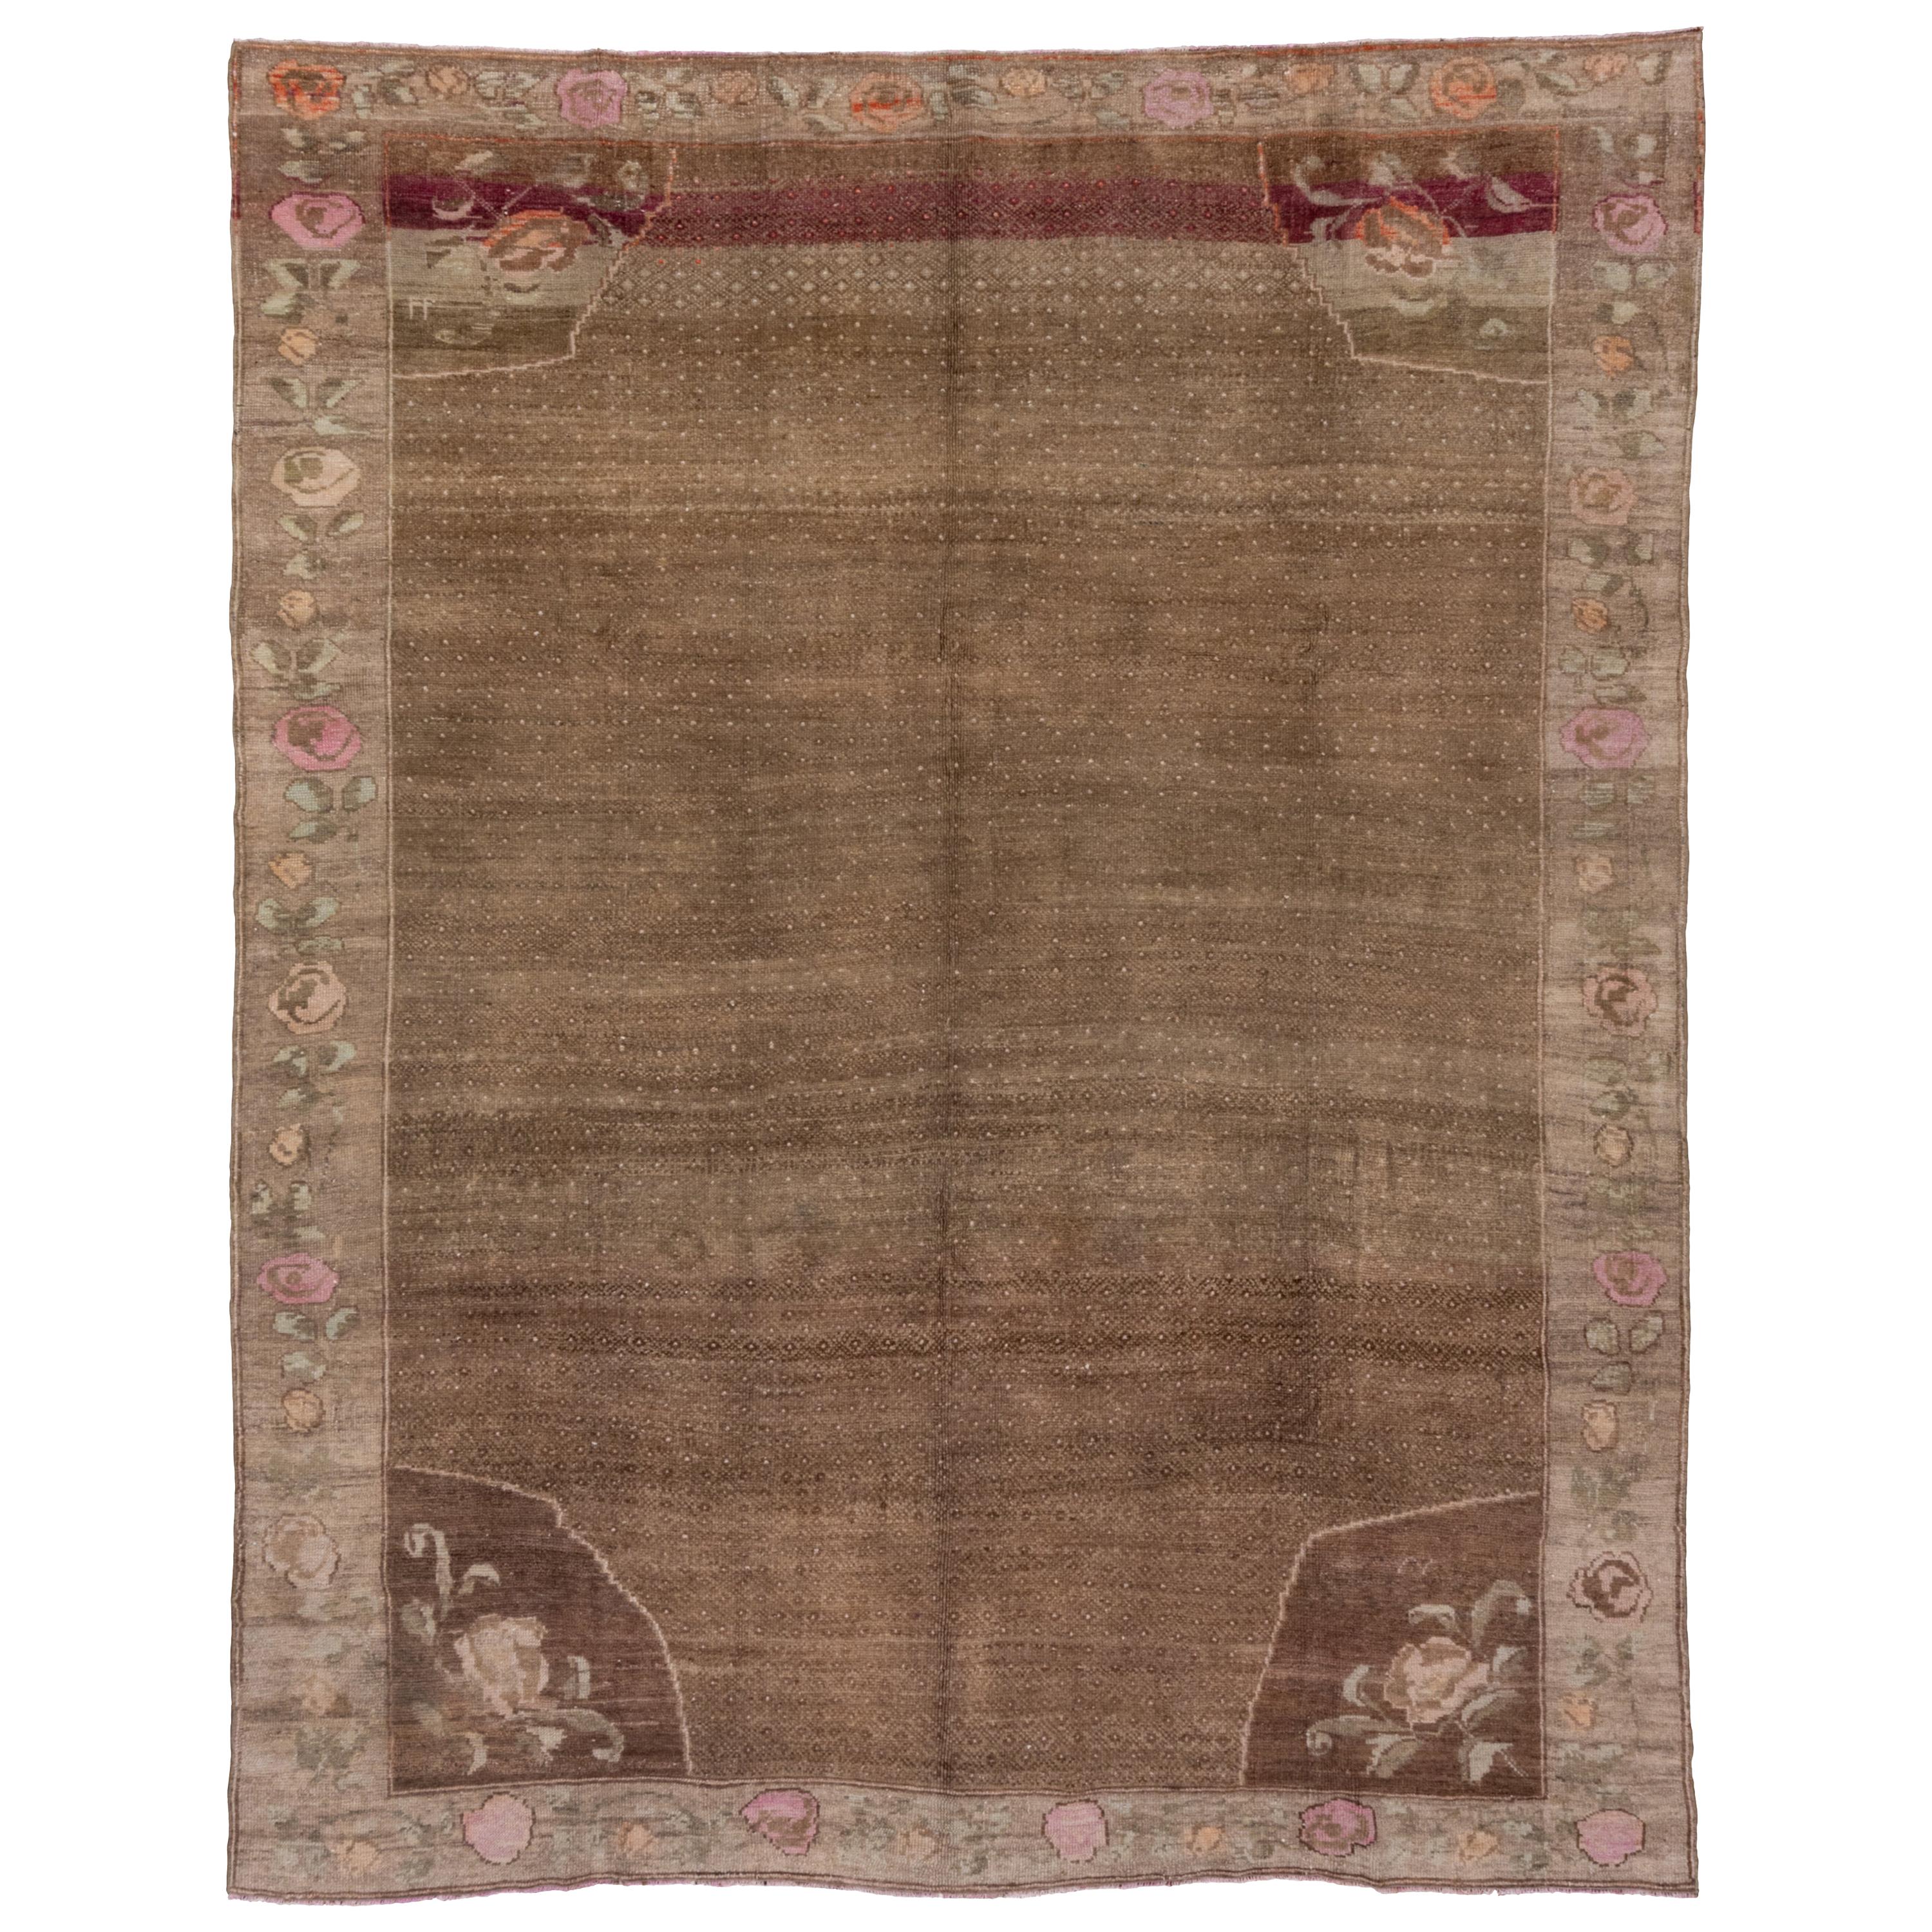 1950s Tribal Turkish Kars Rug, Brown Field, Pink Accents For Sale